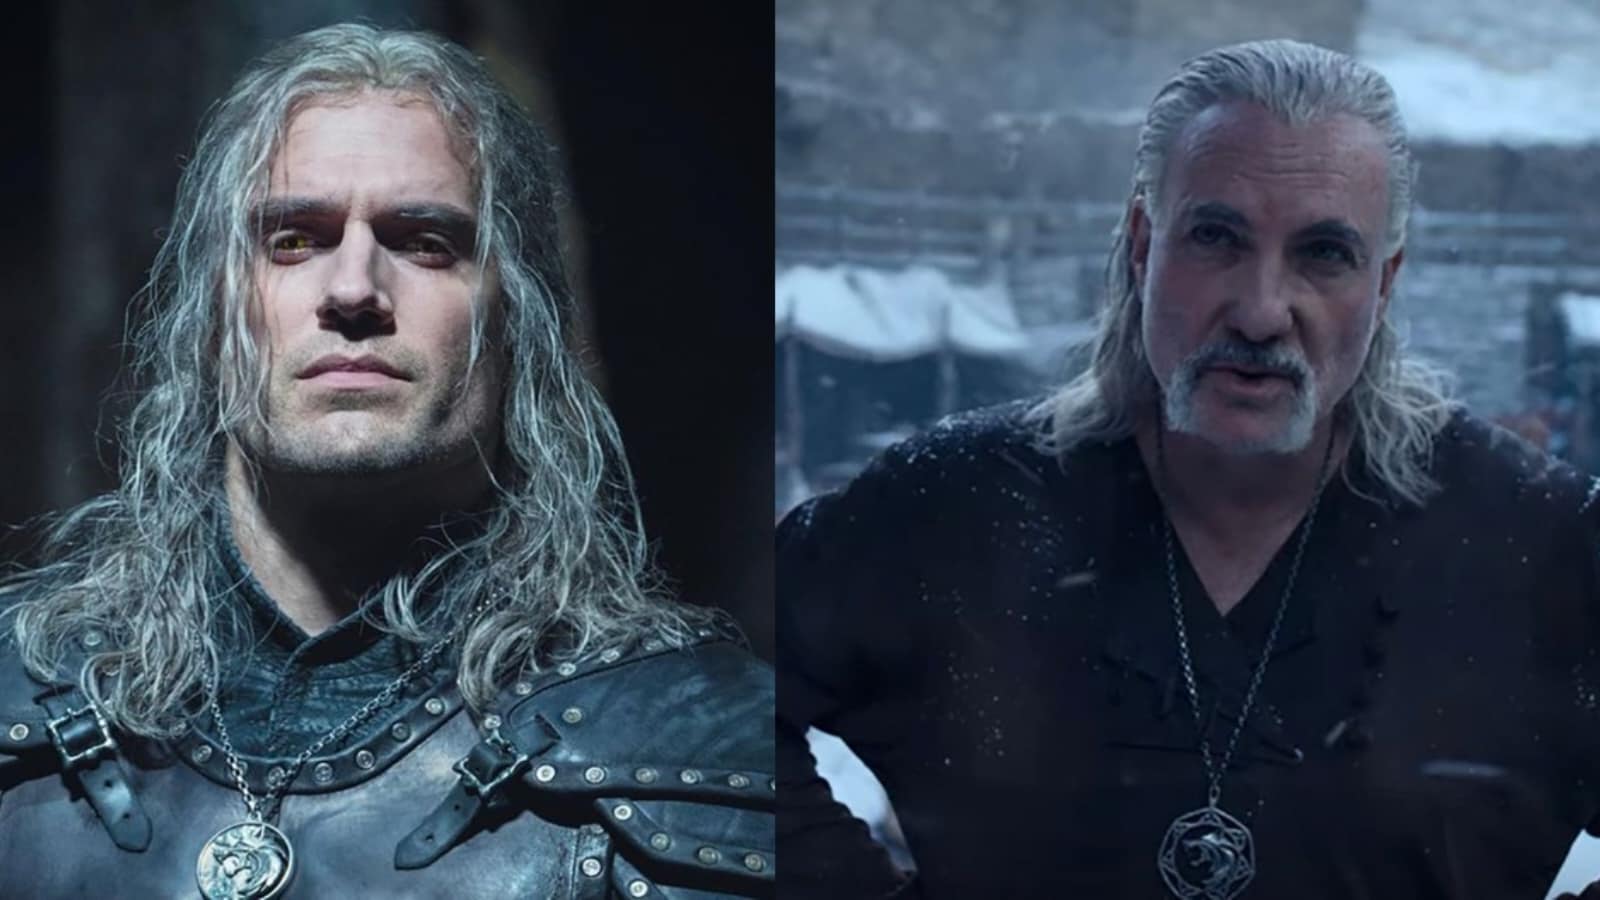 Geralt and Vesemir from The Witcher